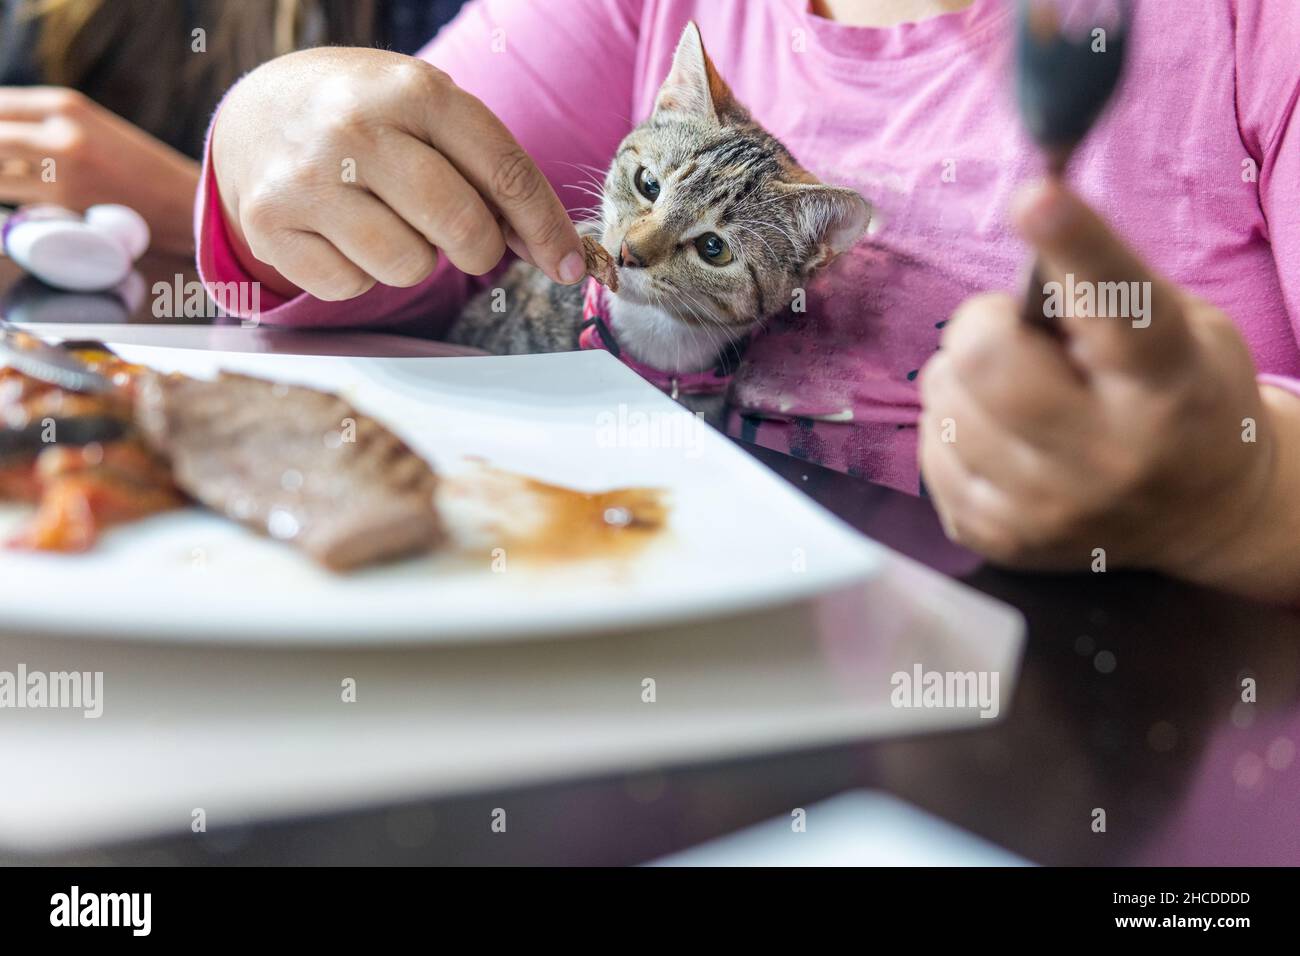 unrecognizable woman sharing her food at the table with a cat Stock Photo